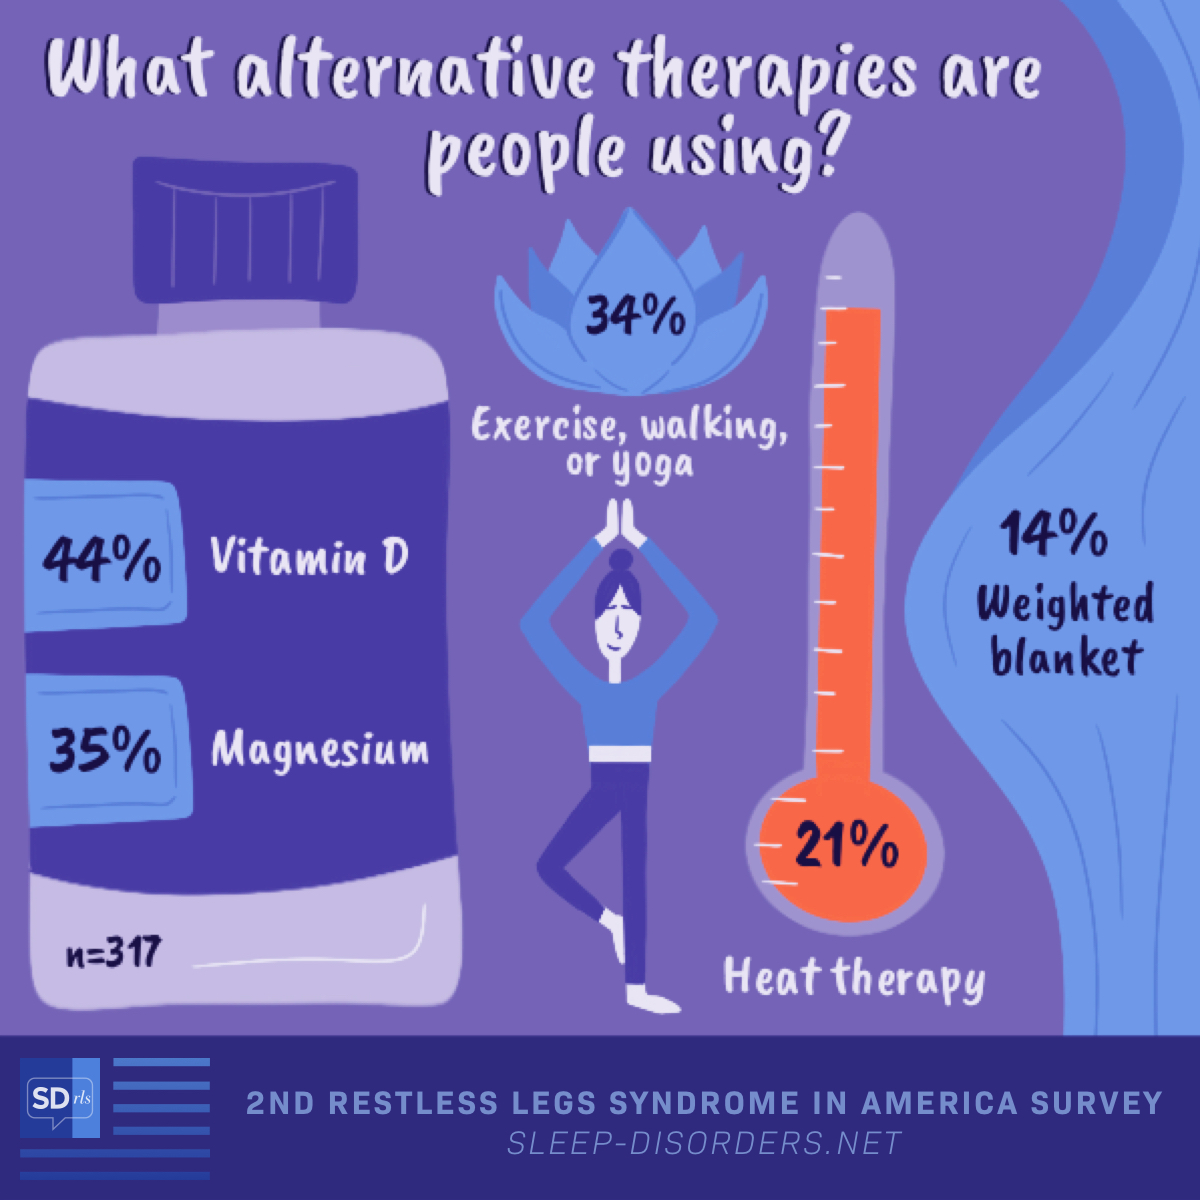 Some alternative therapies that people use for RLS include vitamin D, magnesium, heat therapy, exercise, and weighted blankets.